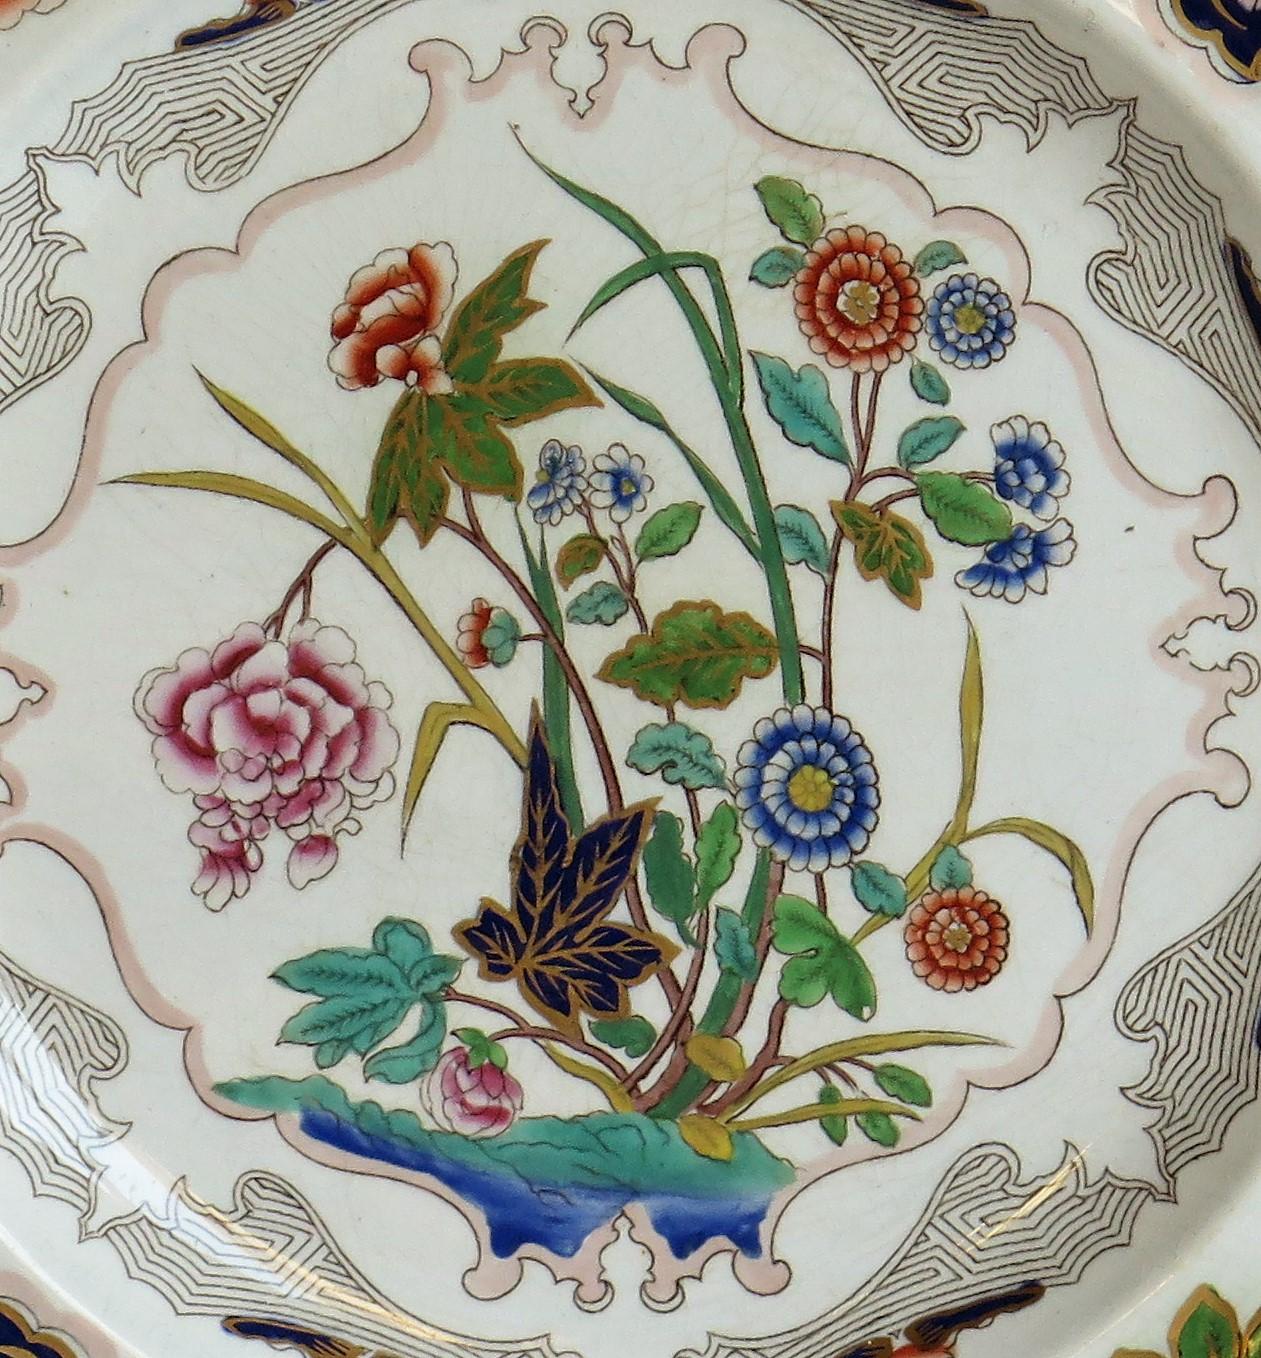 Chinoiserie Charles Meigh Ironstone Plate Hand Painted Floral Pattern No. 422, circa 1840